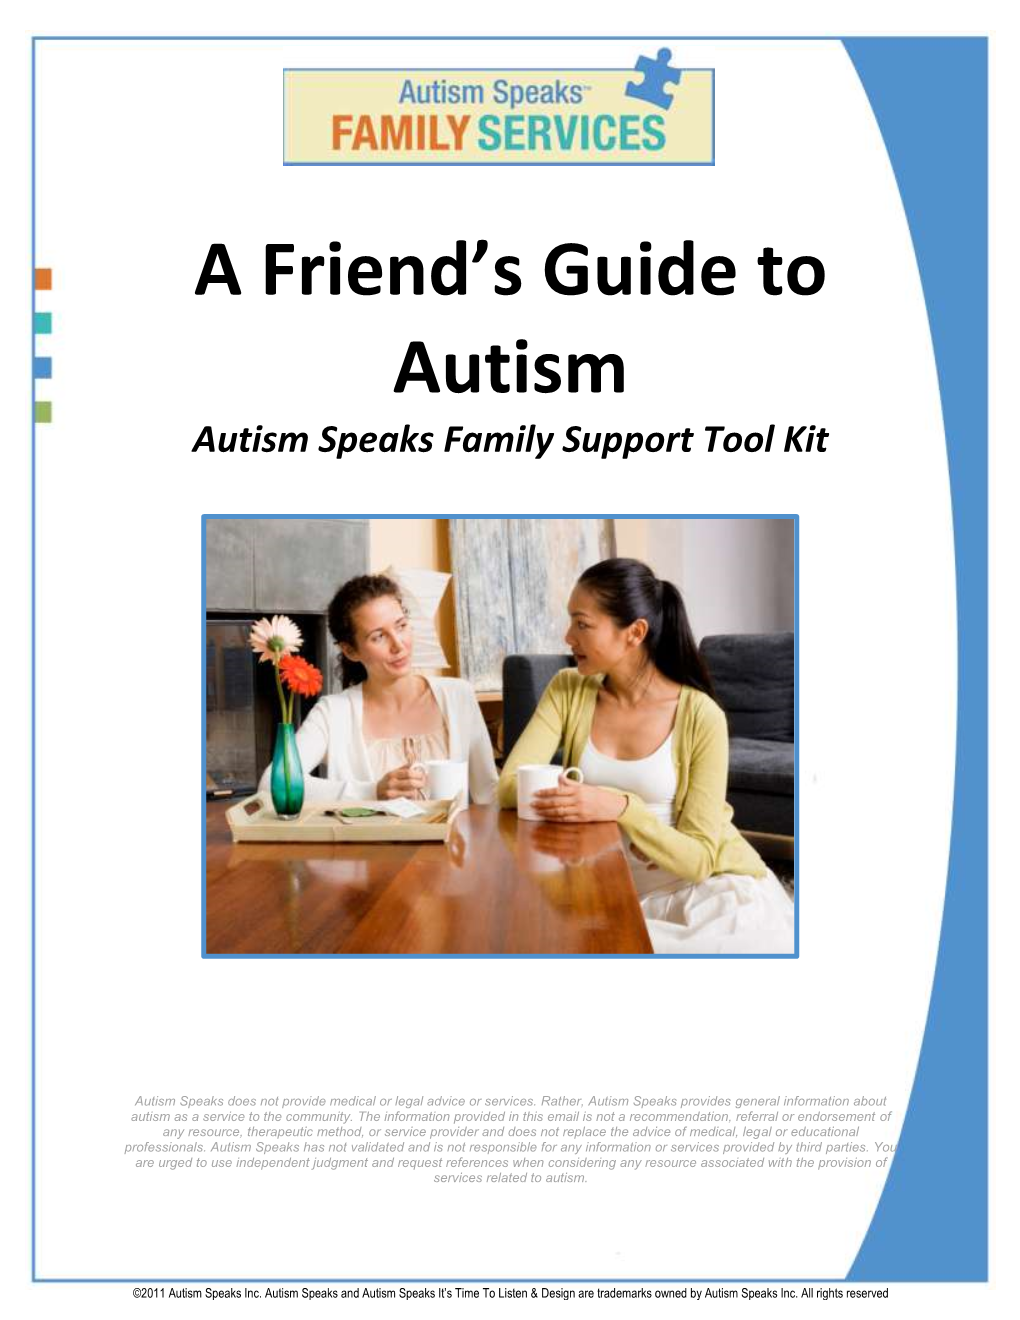 A Friend's Guide to Autism from Autism Speaks